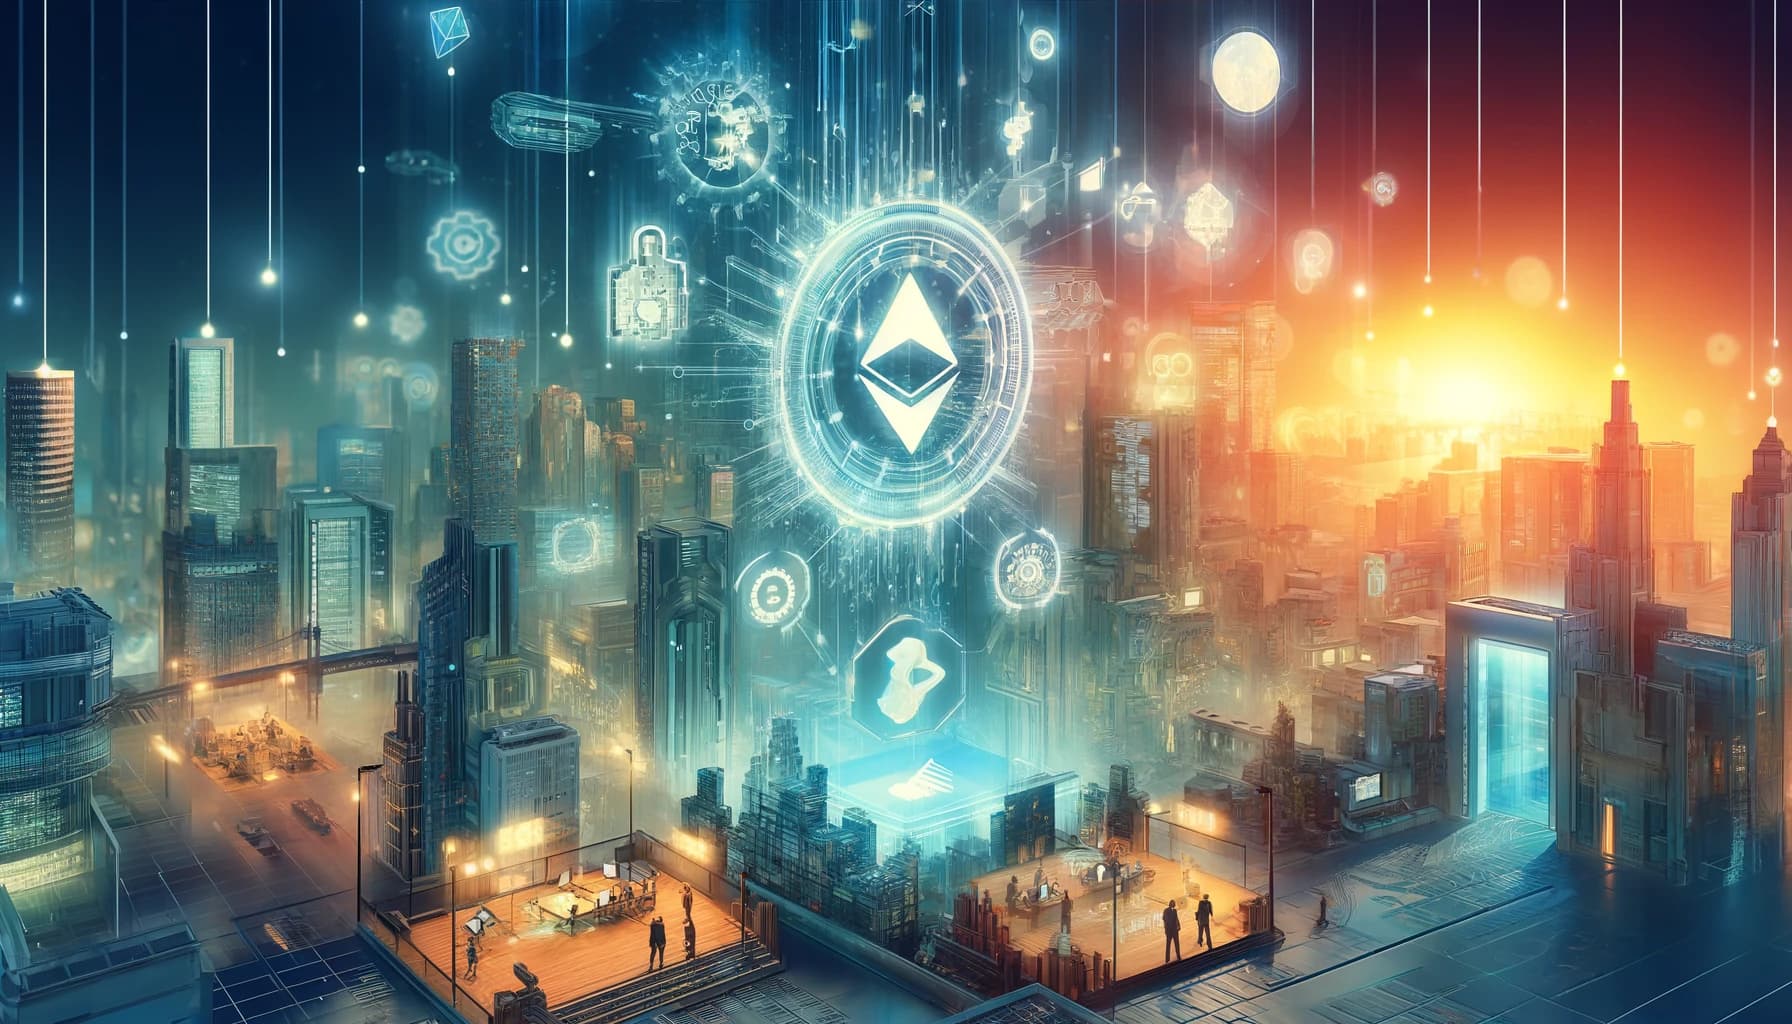 Bucket Technologies image showing a downtown portion of a city with residents gathered in scattered open areas with all individuals facing several large sized bitcoin icons apparently floating in the night time sky.